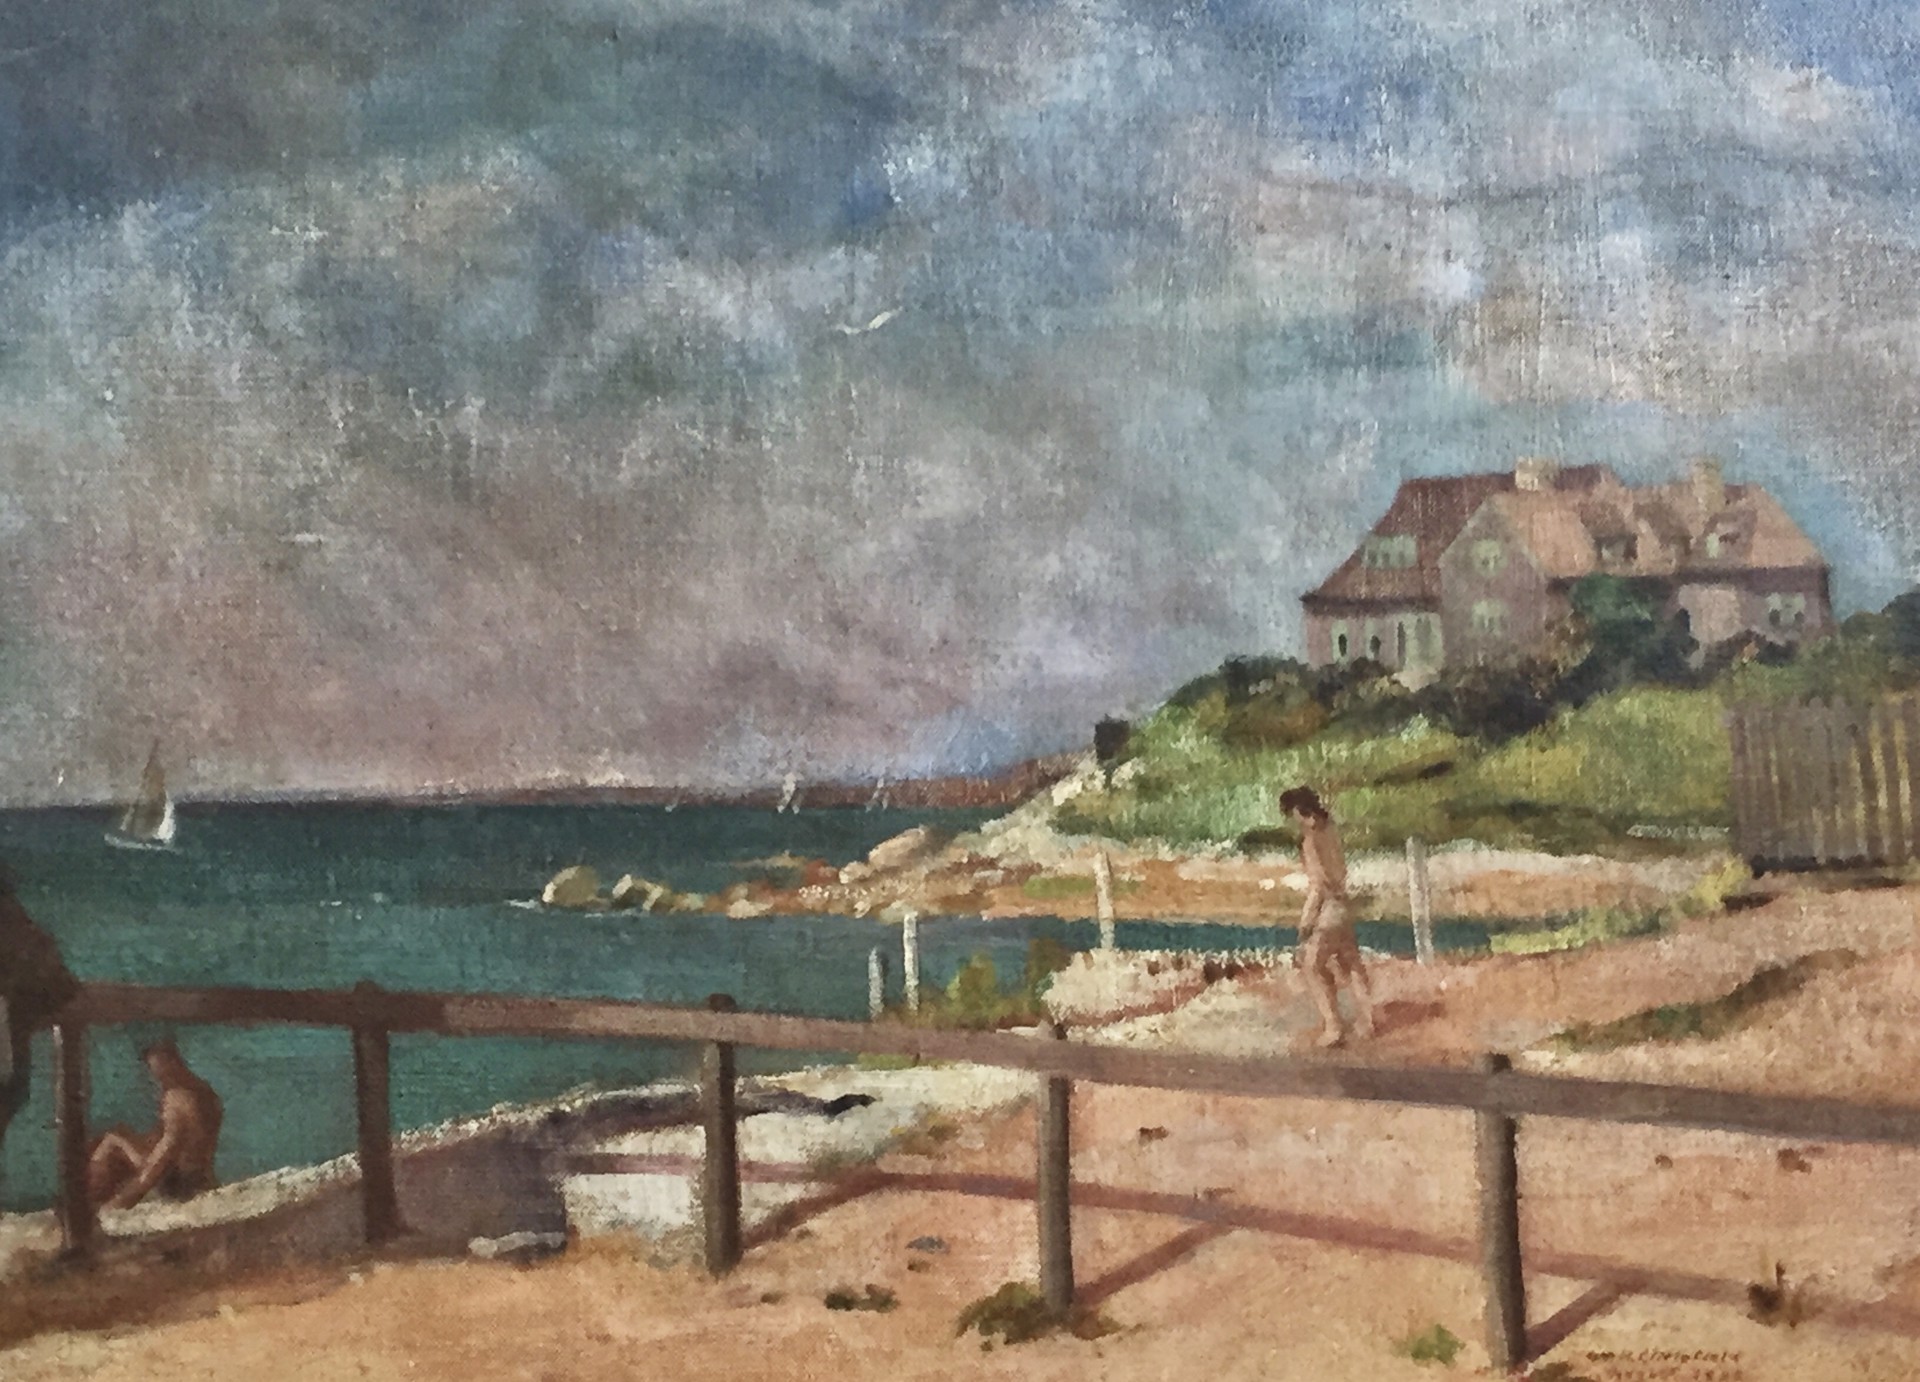 The Bathing Beach, Woods Hole by William H. Littlefield